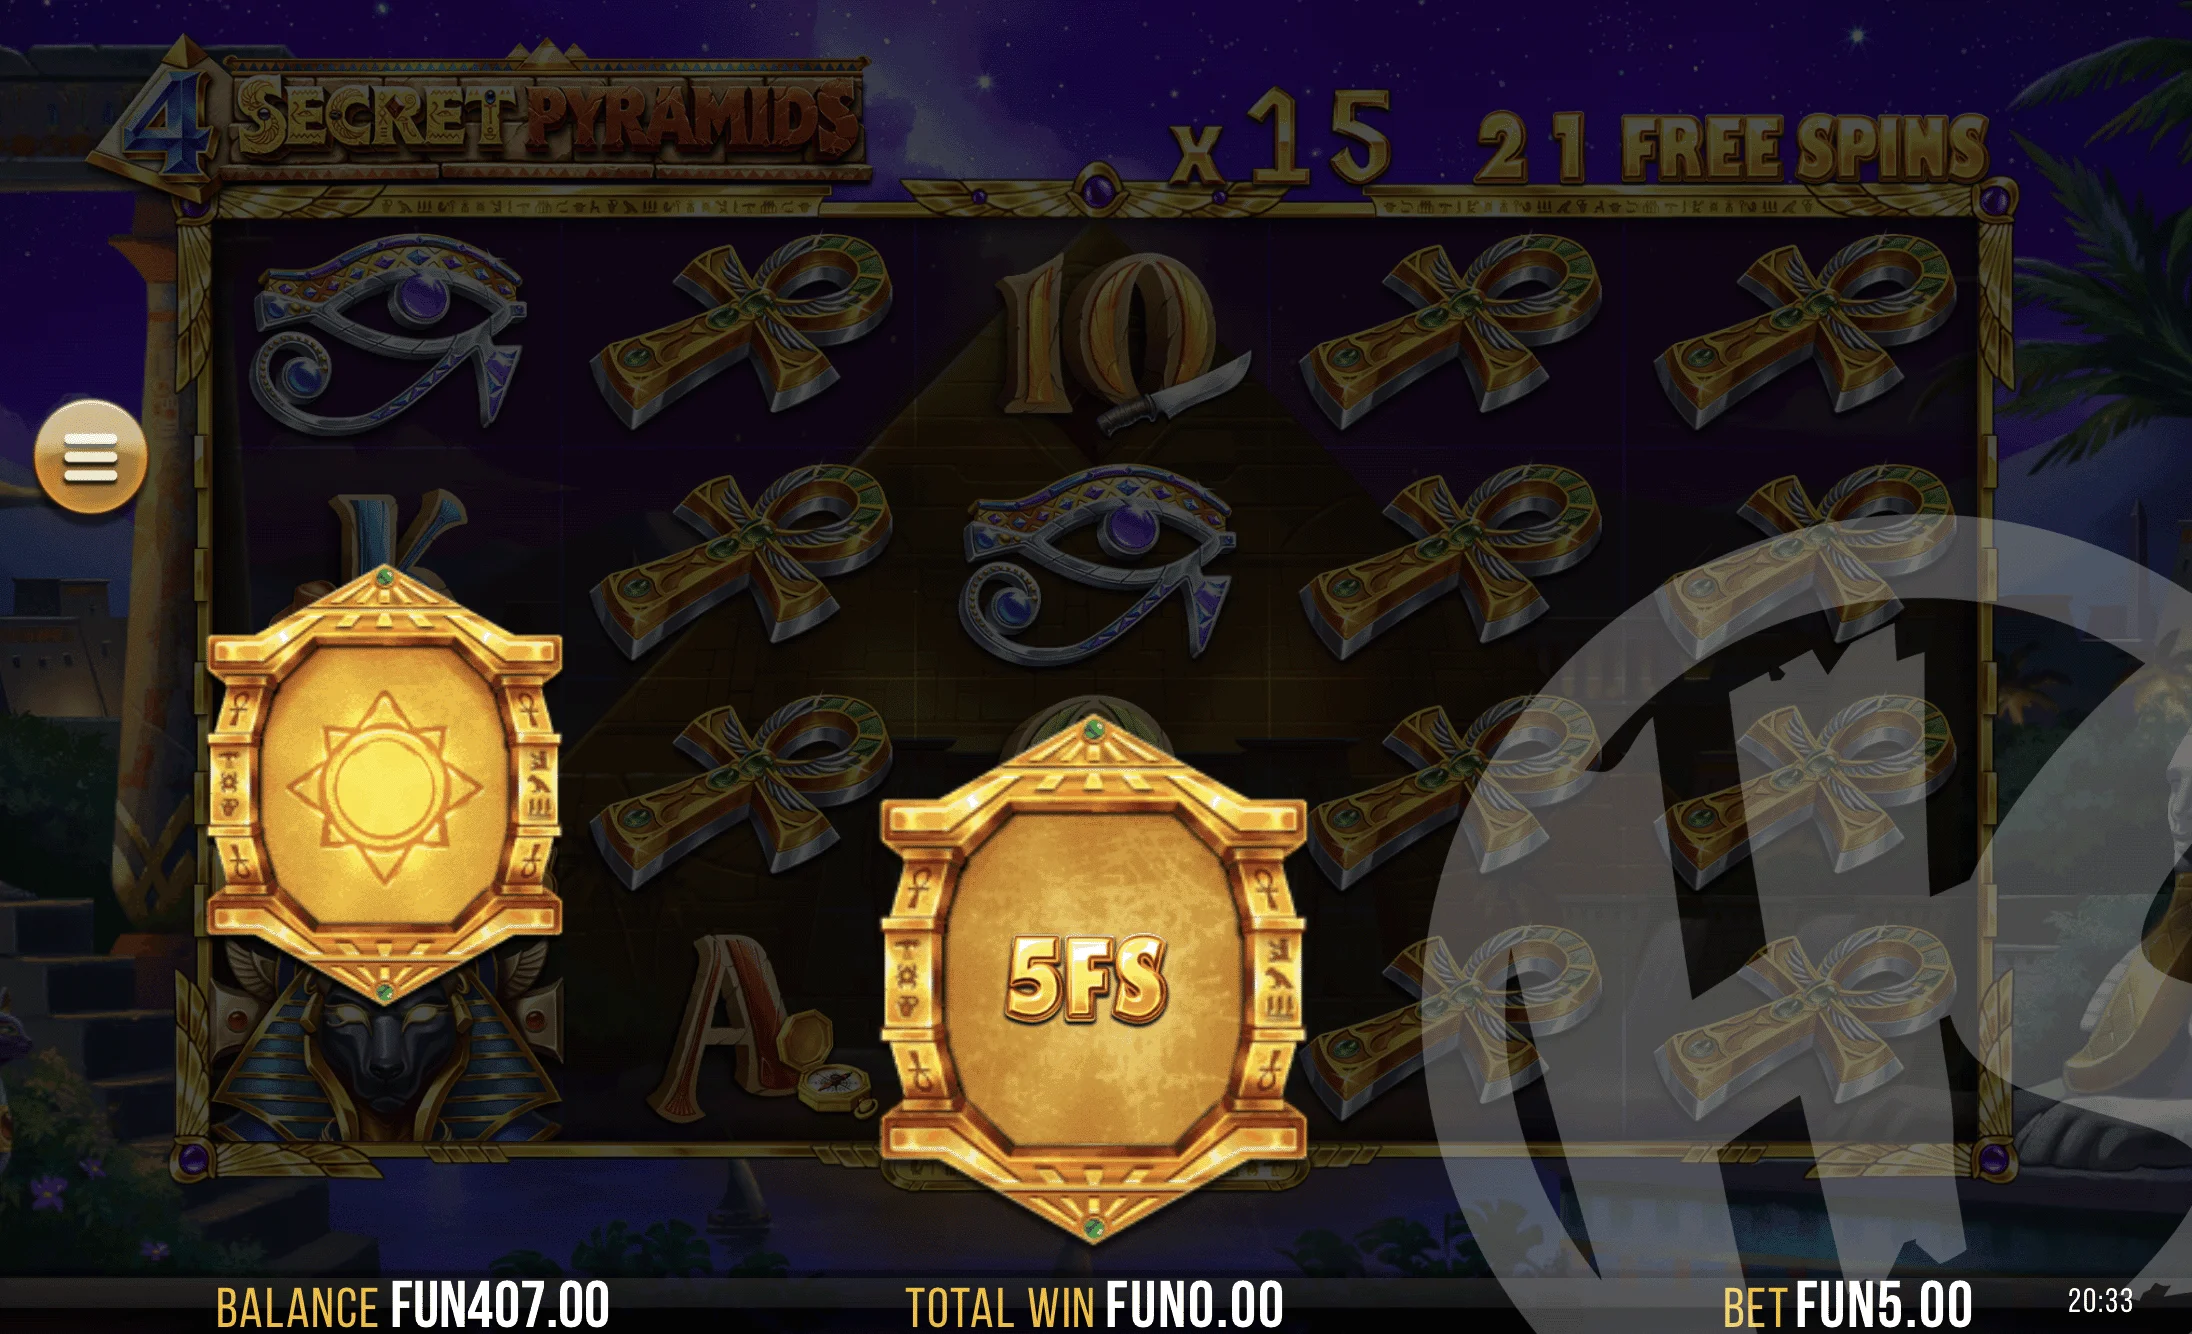 Land 2 Scatters on Reels 1 and 3 During Free Spins to Trigger an Additional 5-10 Free Spins